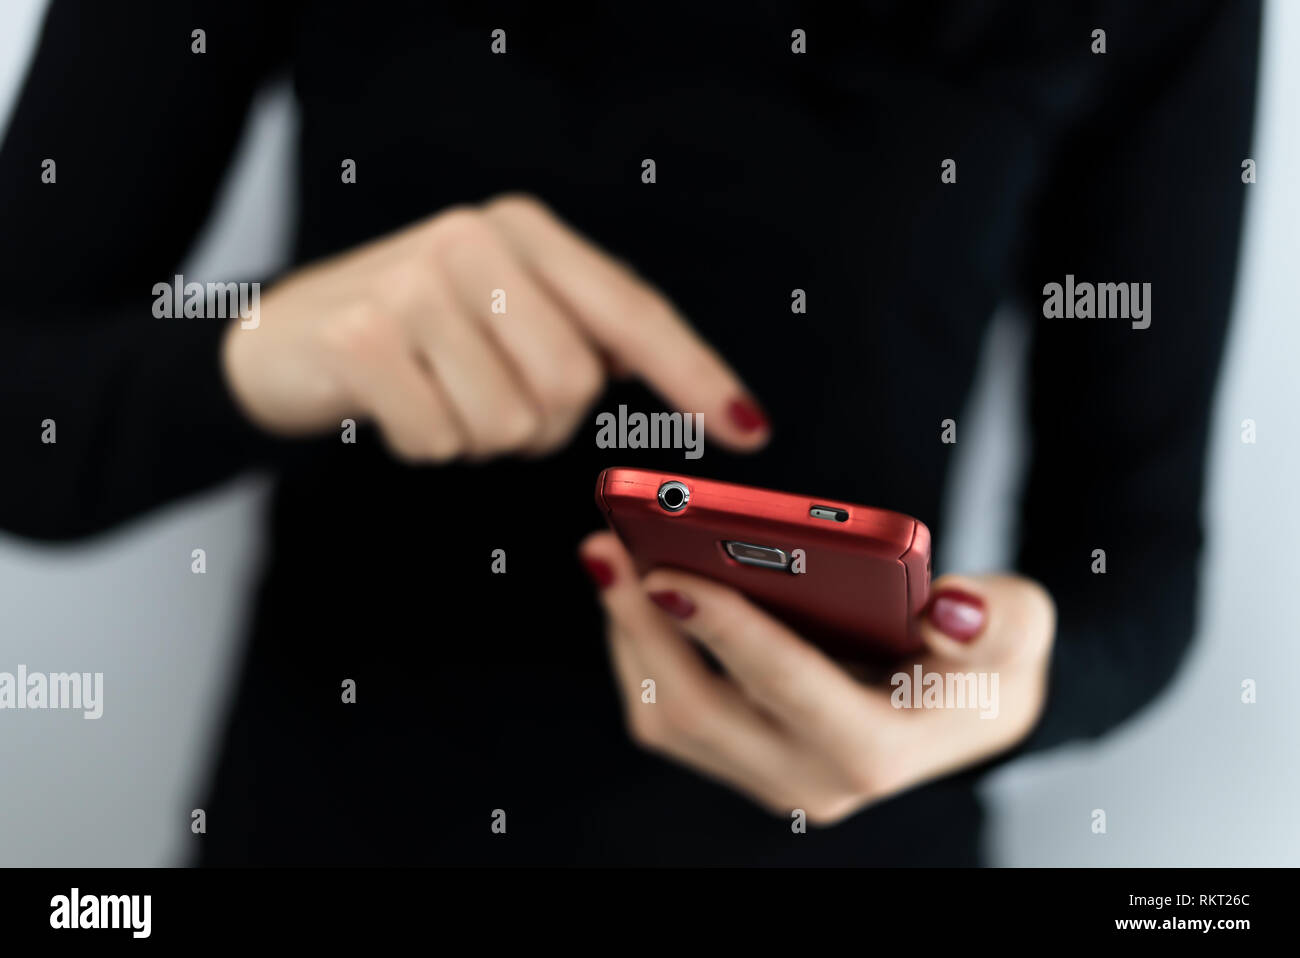 Closeup detail of young woman holding a red cell phone with camera using a touchscreen with apps to connect on social media, texting and chatting Stock Photo